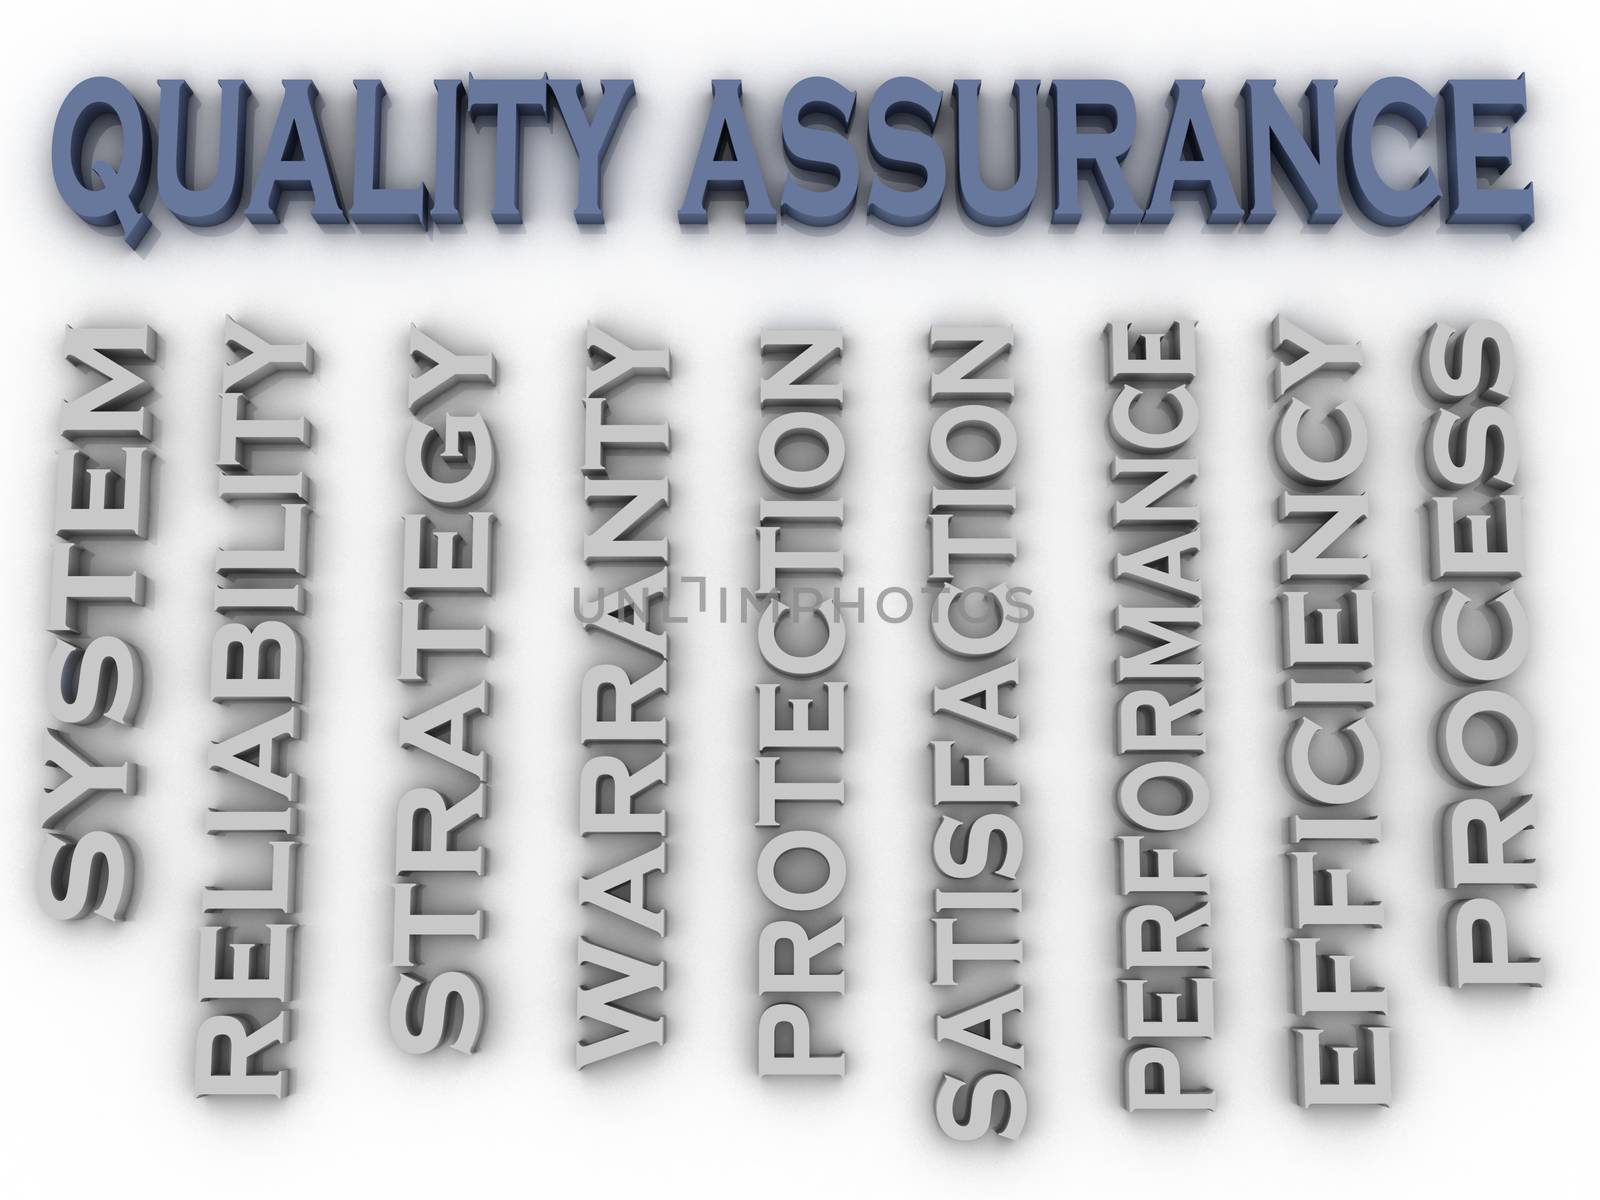 3d image Quality Assurance issues concept word cloud background by dacasdo